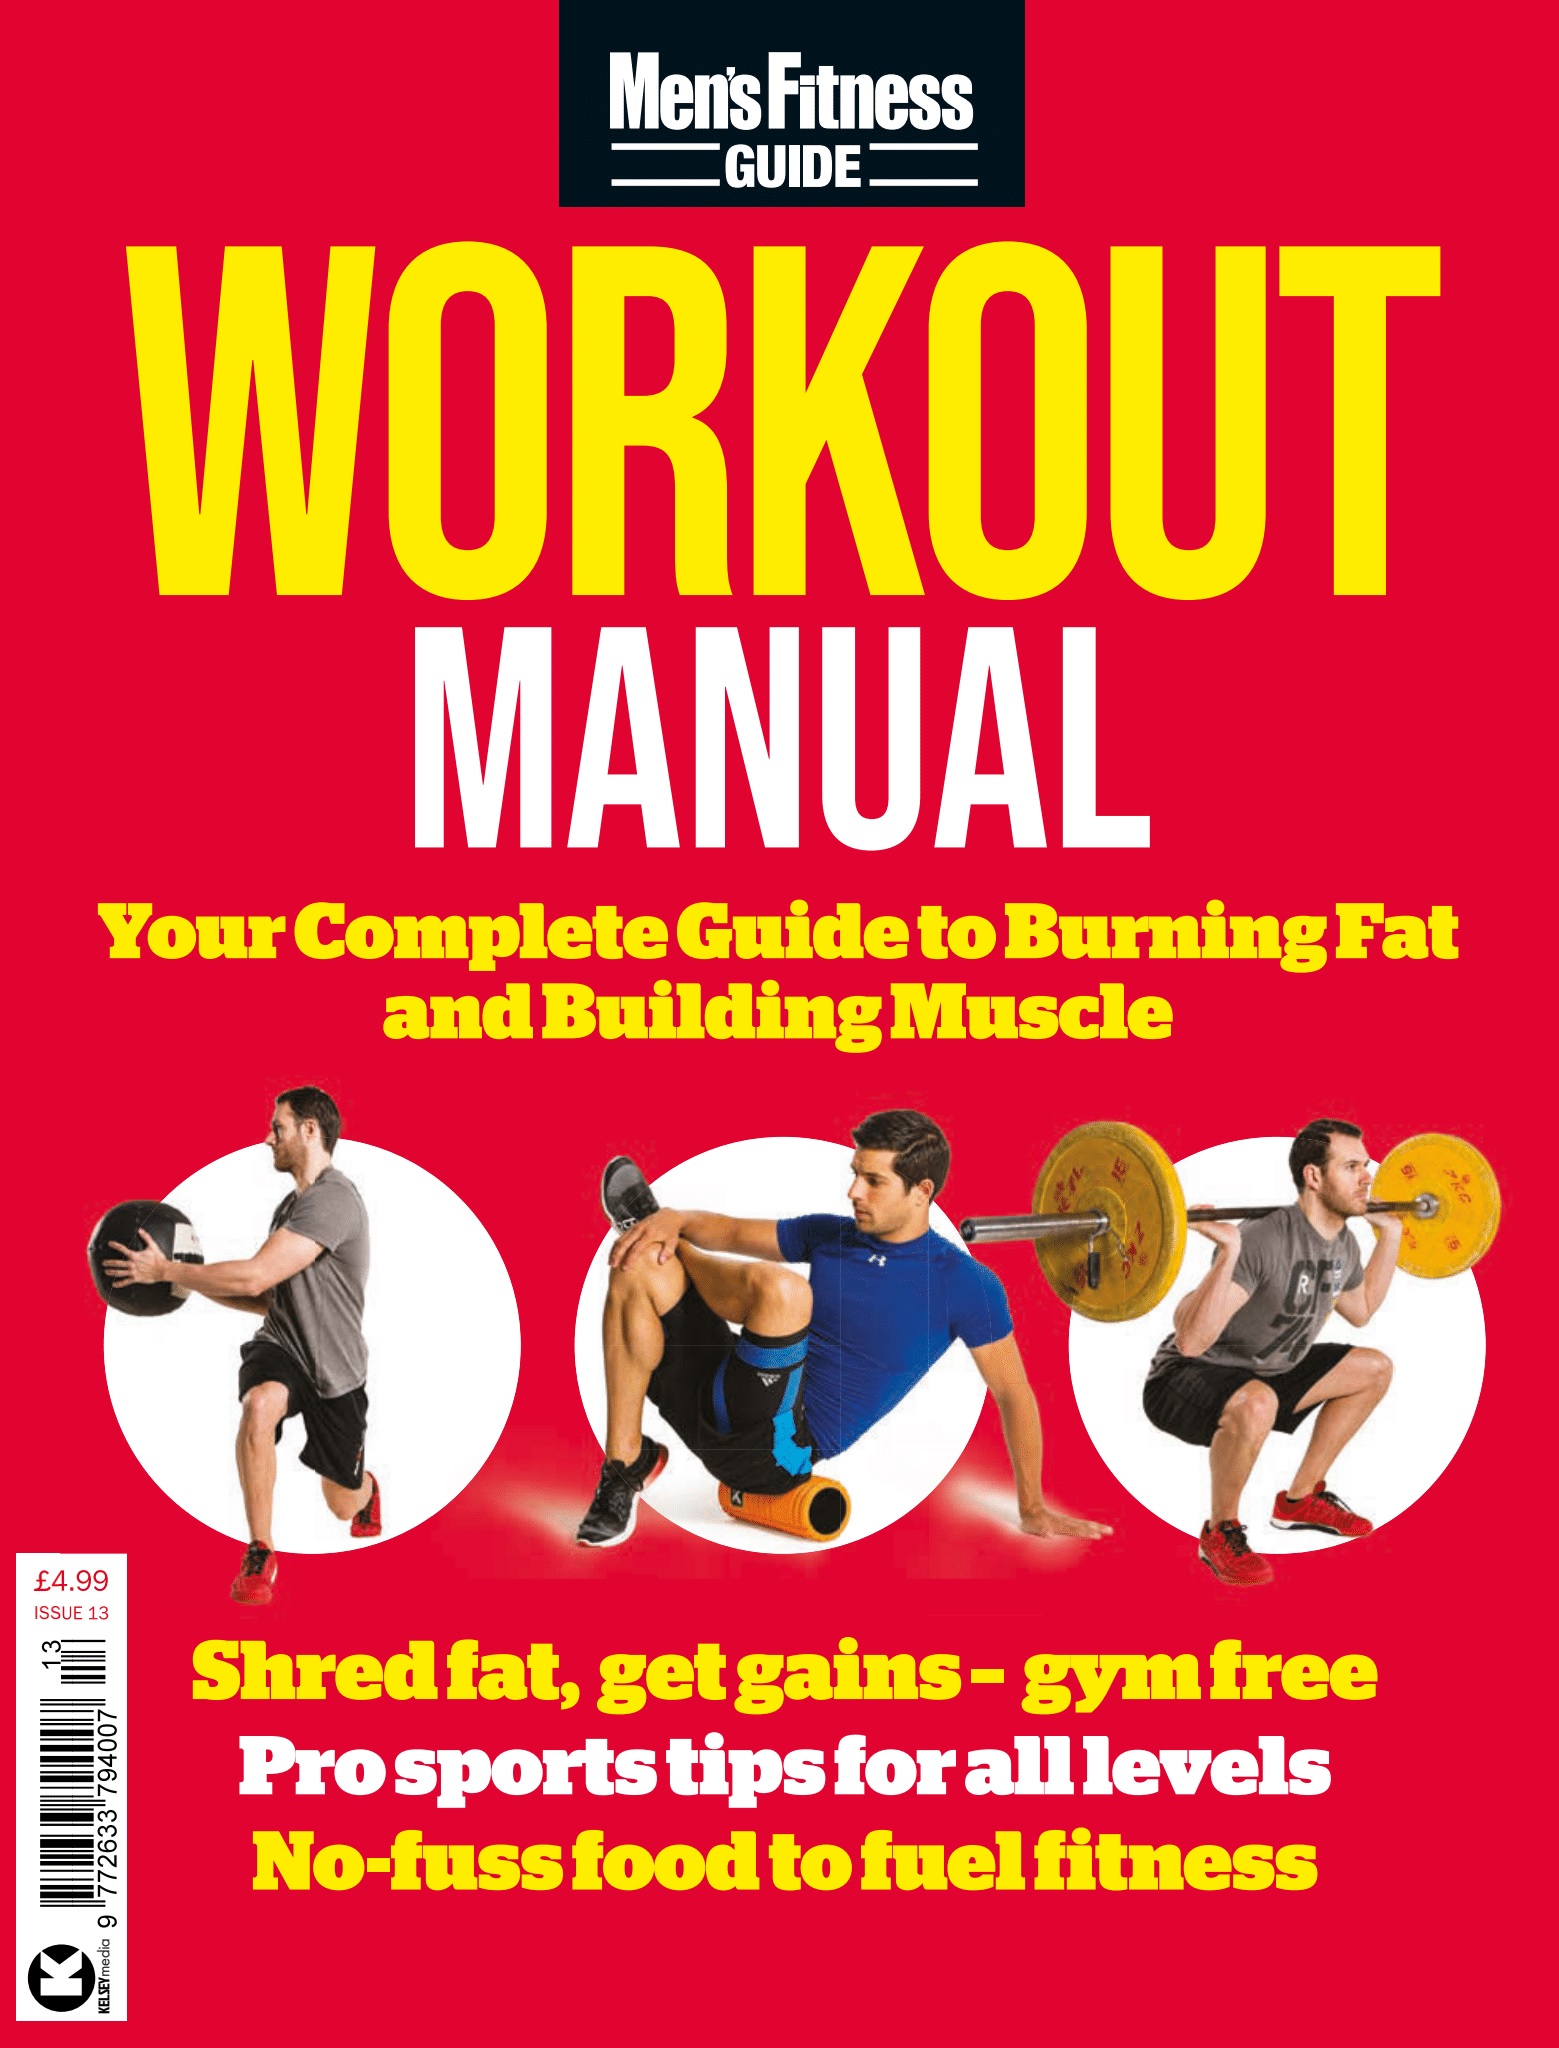 Men's Fitness Guide #13 Workout Manual